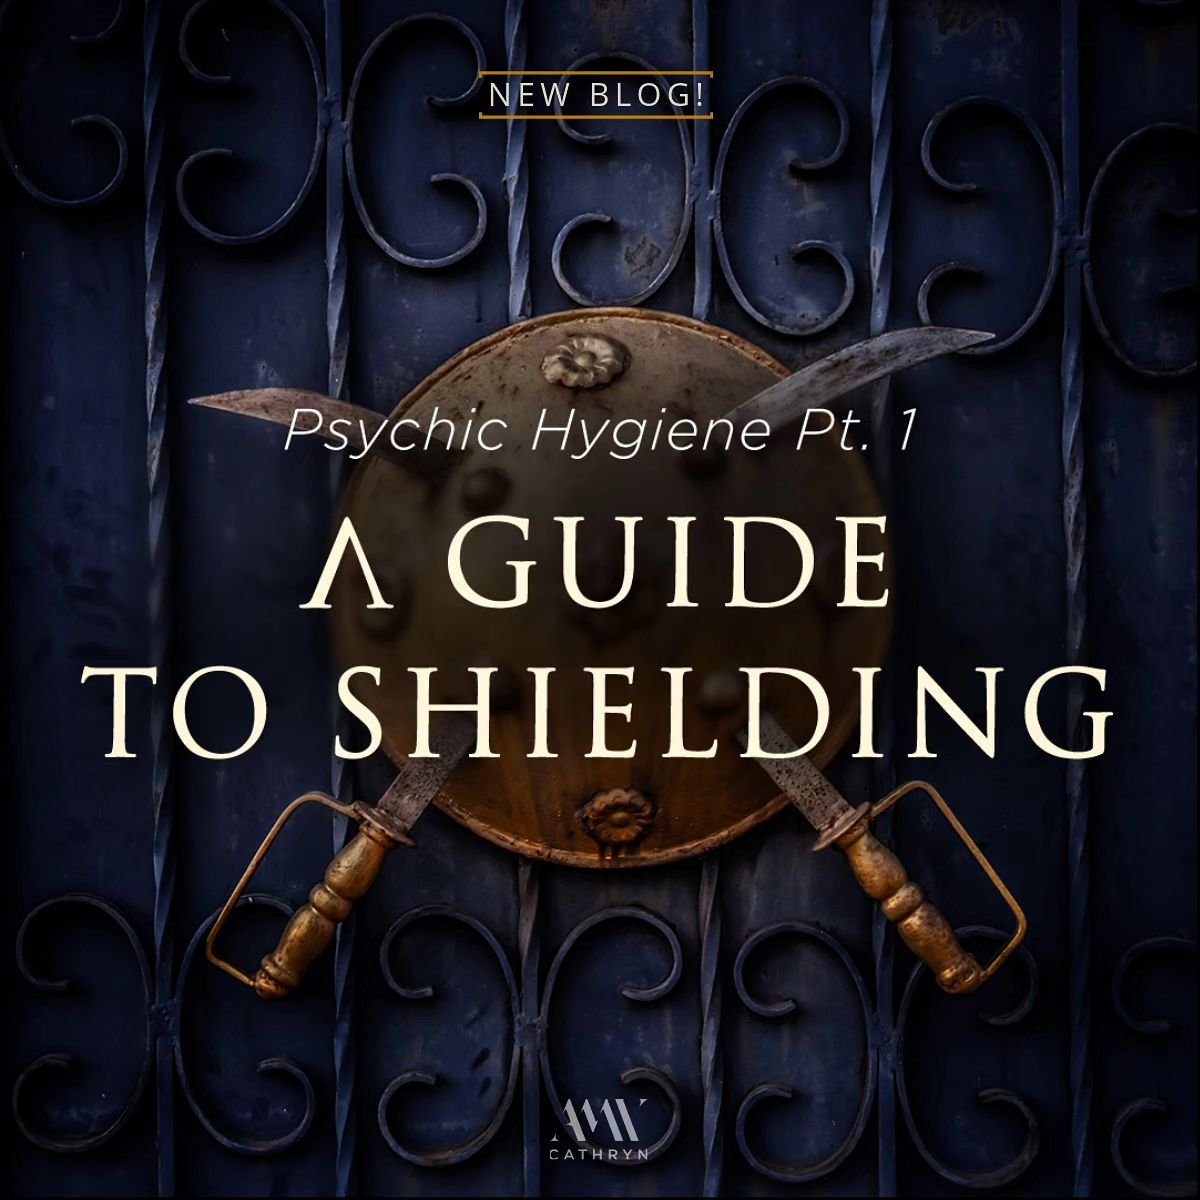 What do you think you know about shielding? A guide for the beginners &amp; experienced alike &mdash; this is your source for shielding &amp; techniques you&rsquo;ve likely never heard of.

Link in bio. 💖
And at amycathryn.com/blog/2024/shielding 

